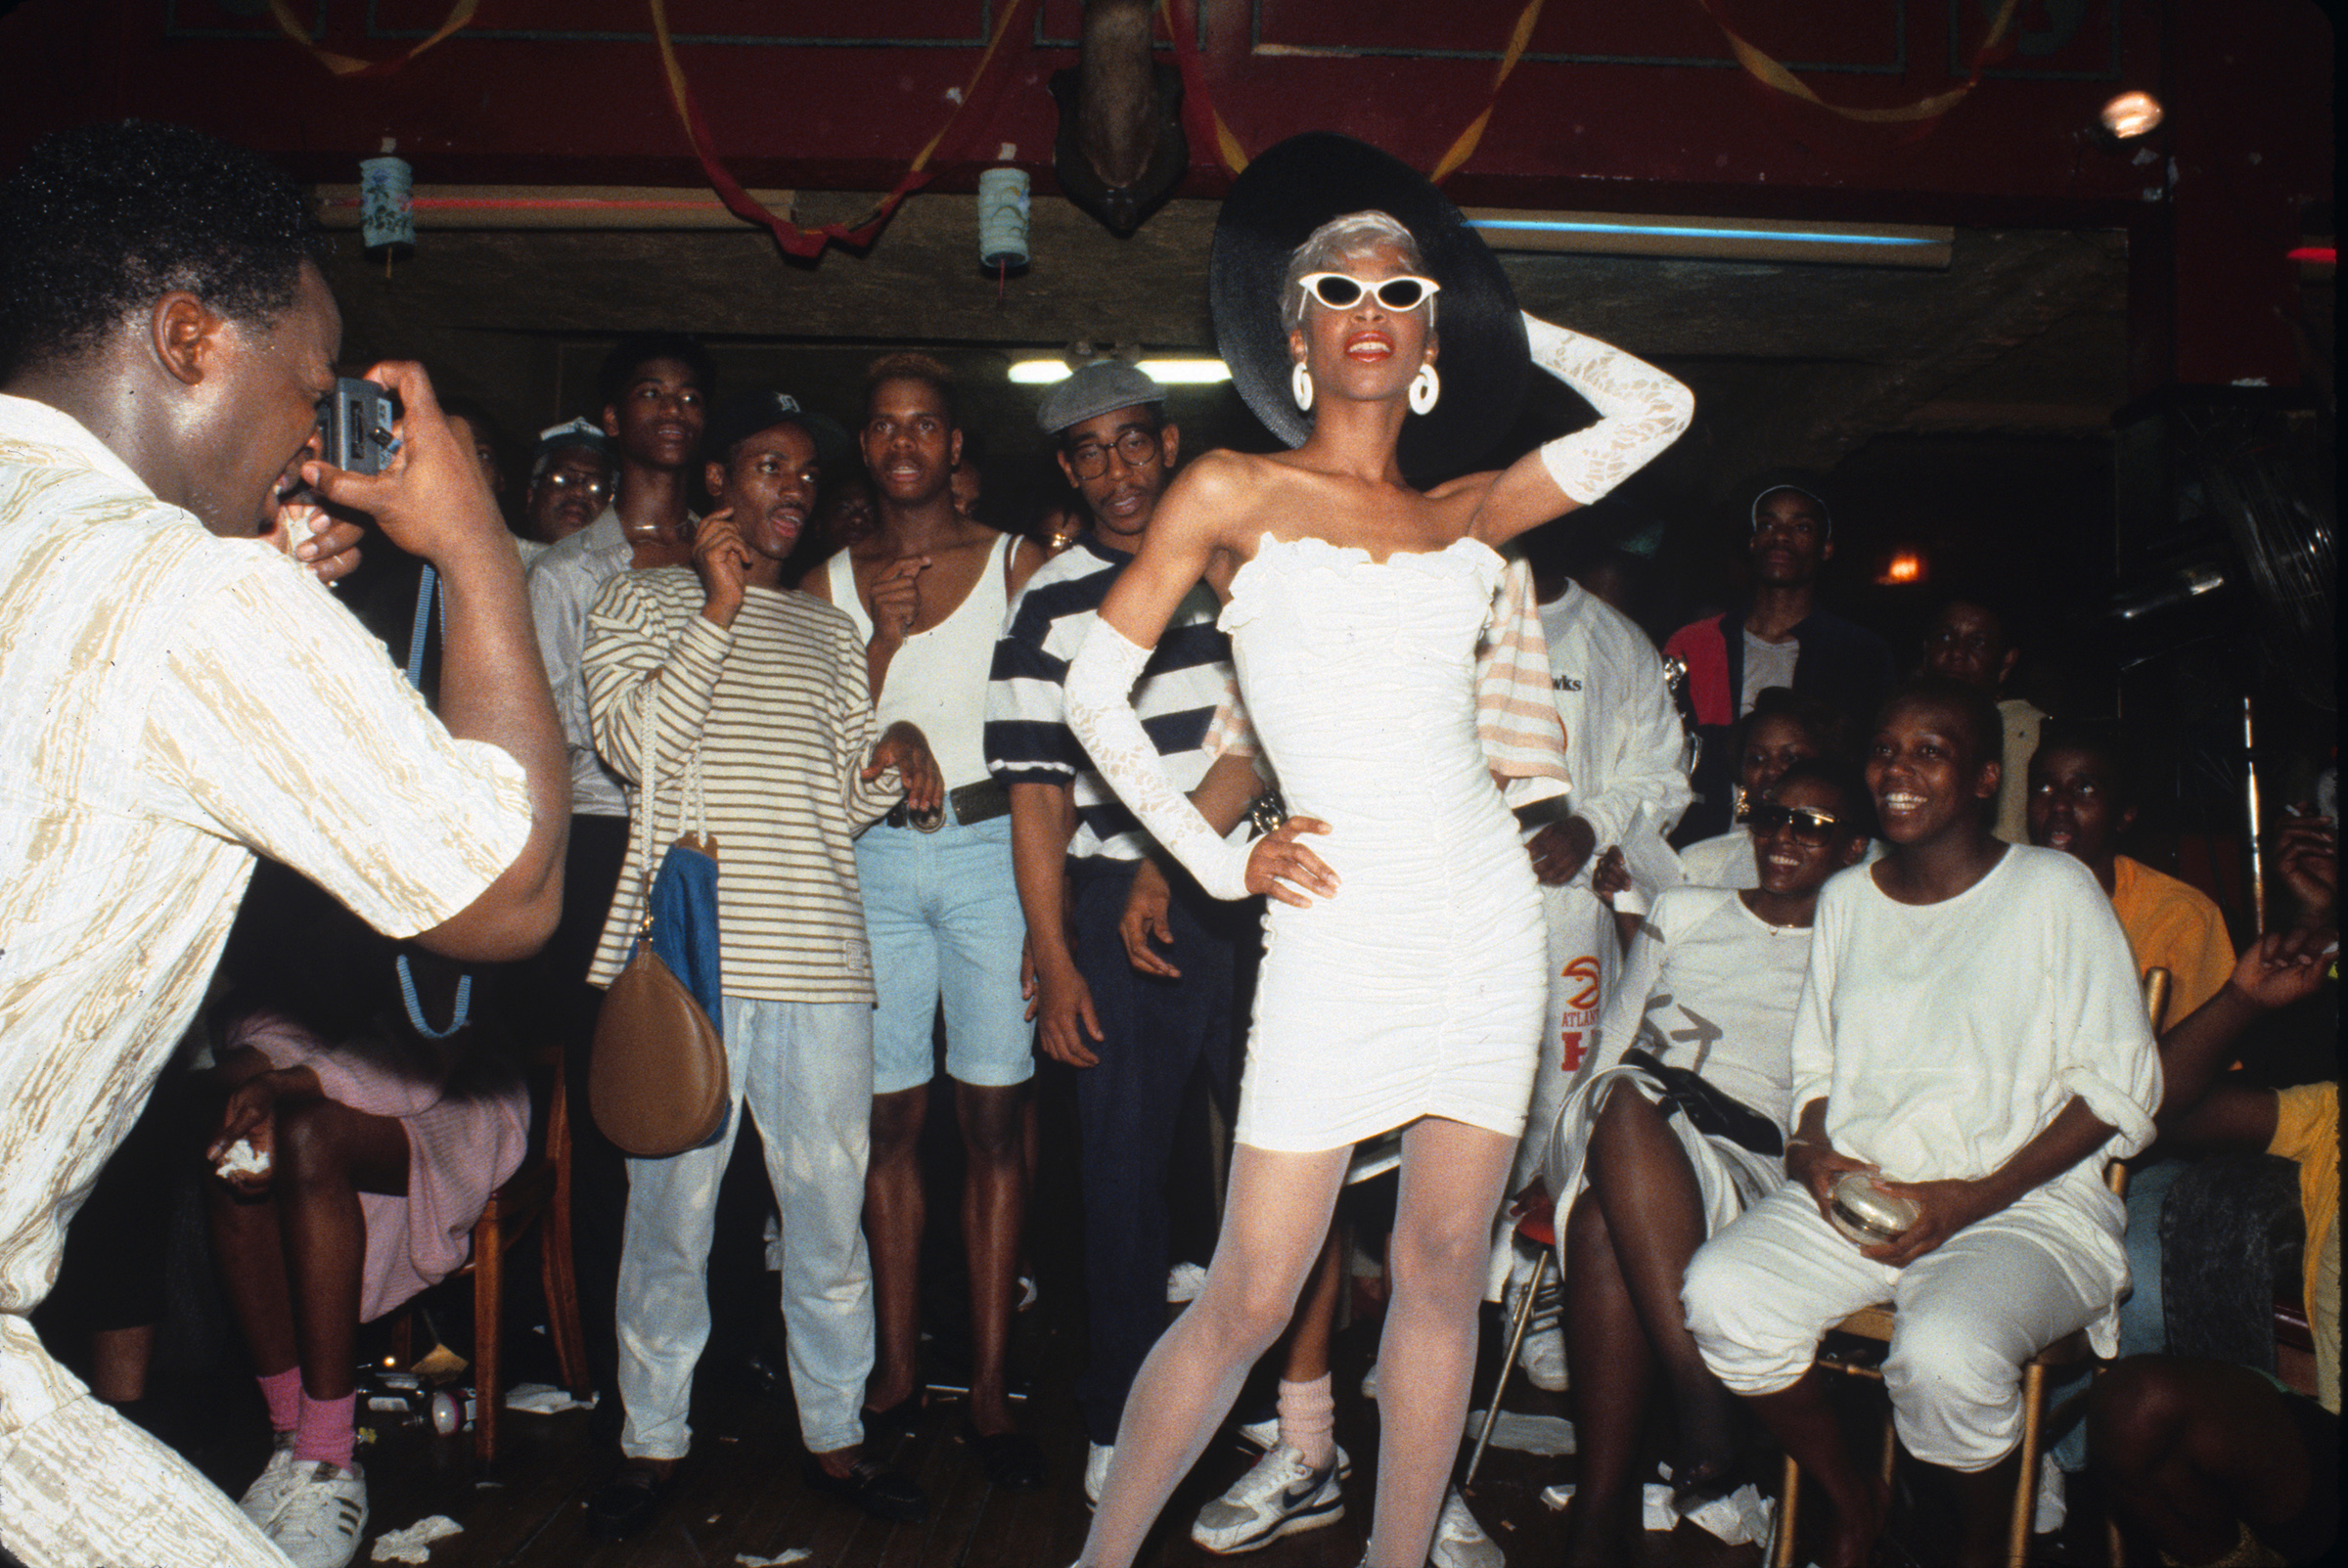 Octavia St. Laurent attends a Drag Ball in New York in 1988. (Catherine McGann—Getty Images)